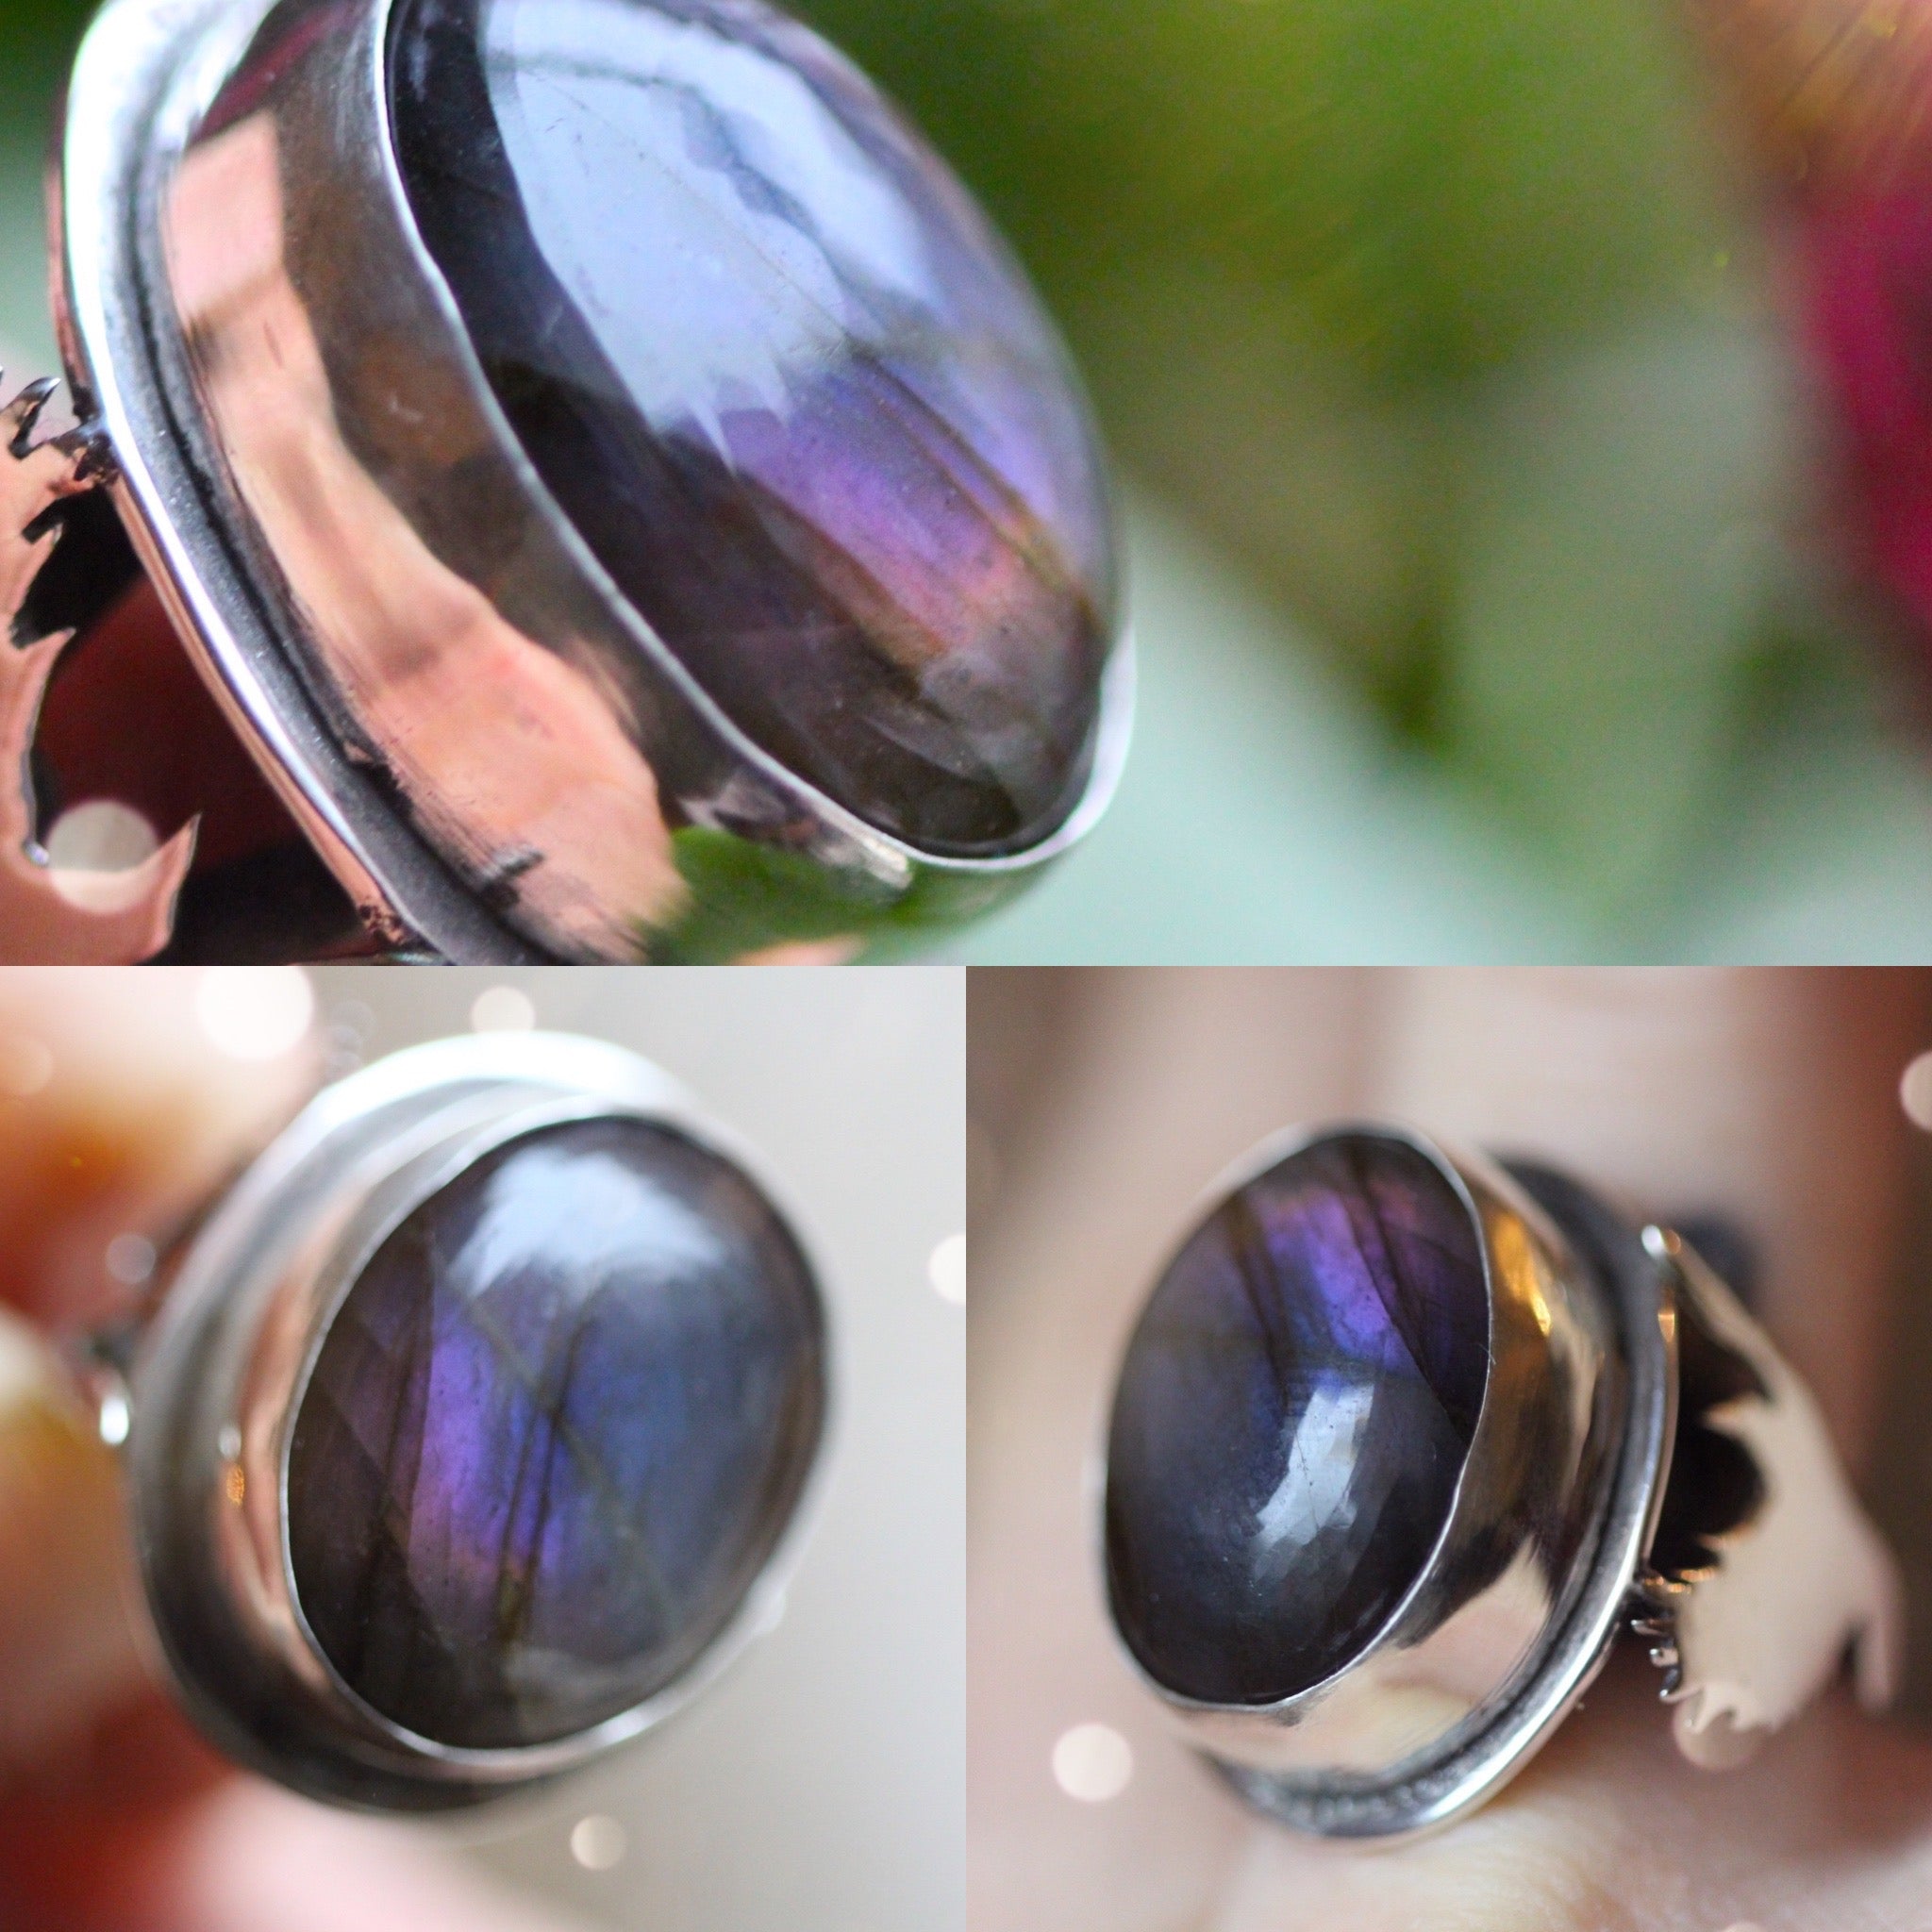 INTO THE AURORA Handmade Sterling Silver Ring with Purple Labradorite - Size N / 6.5